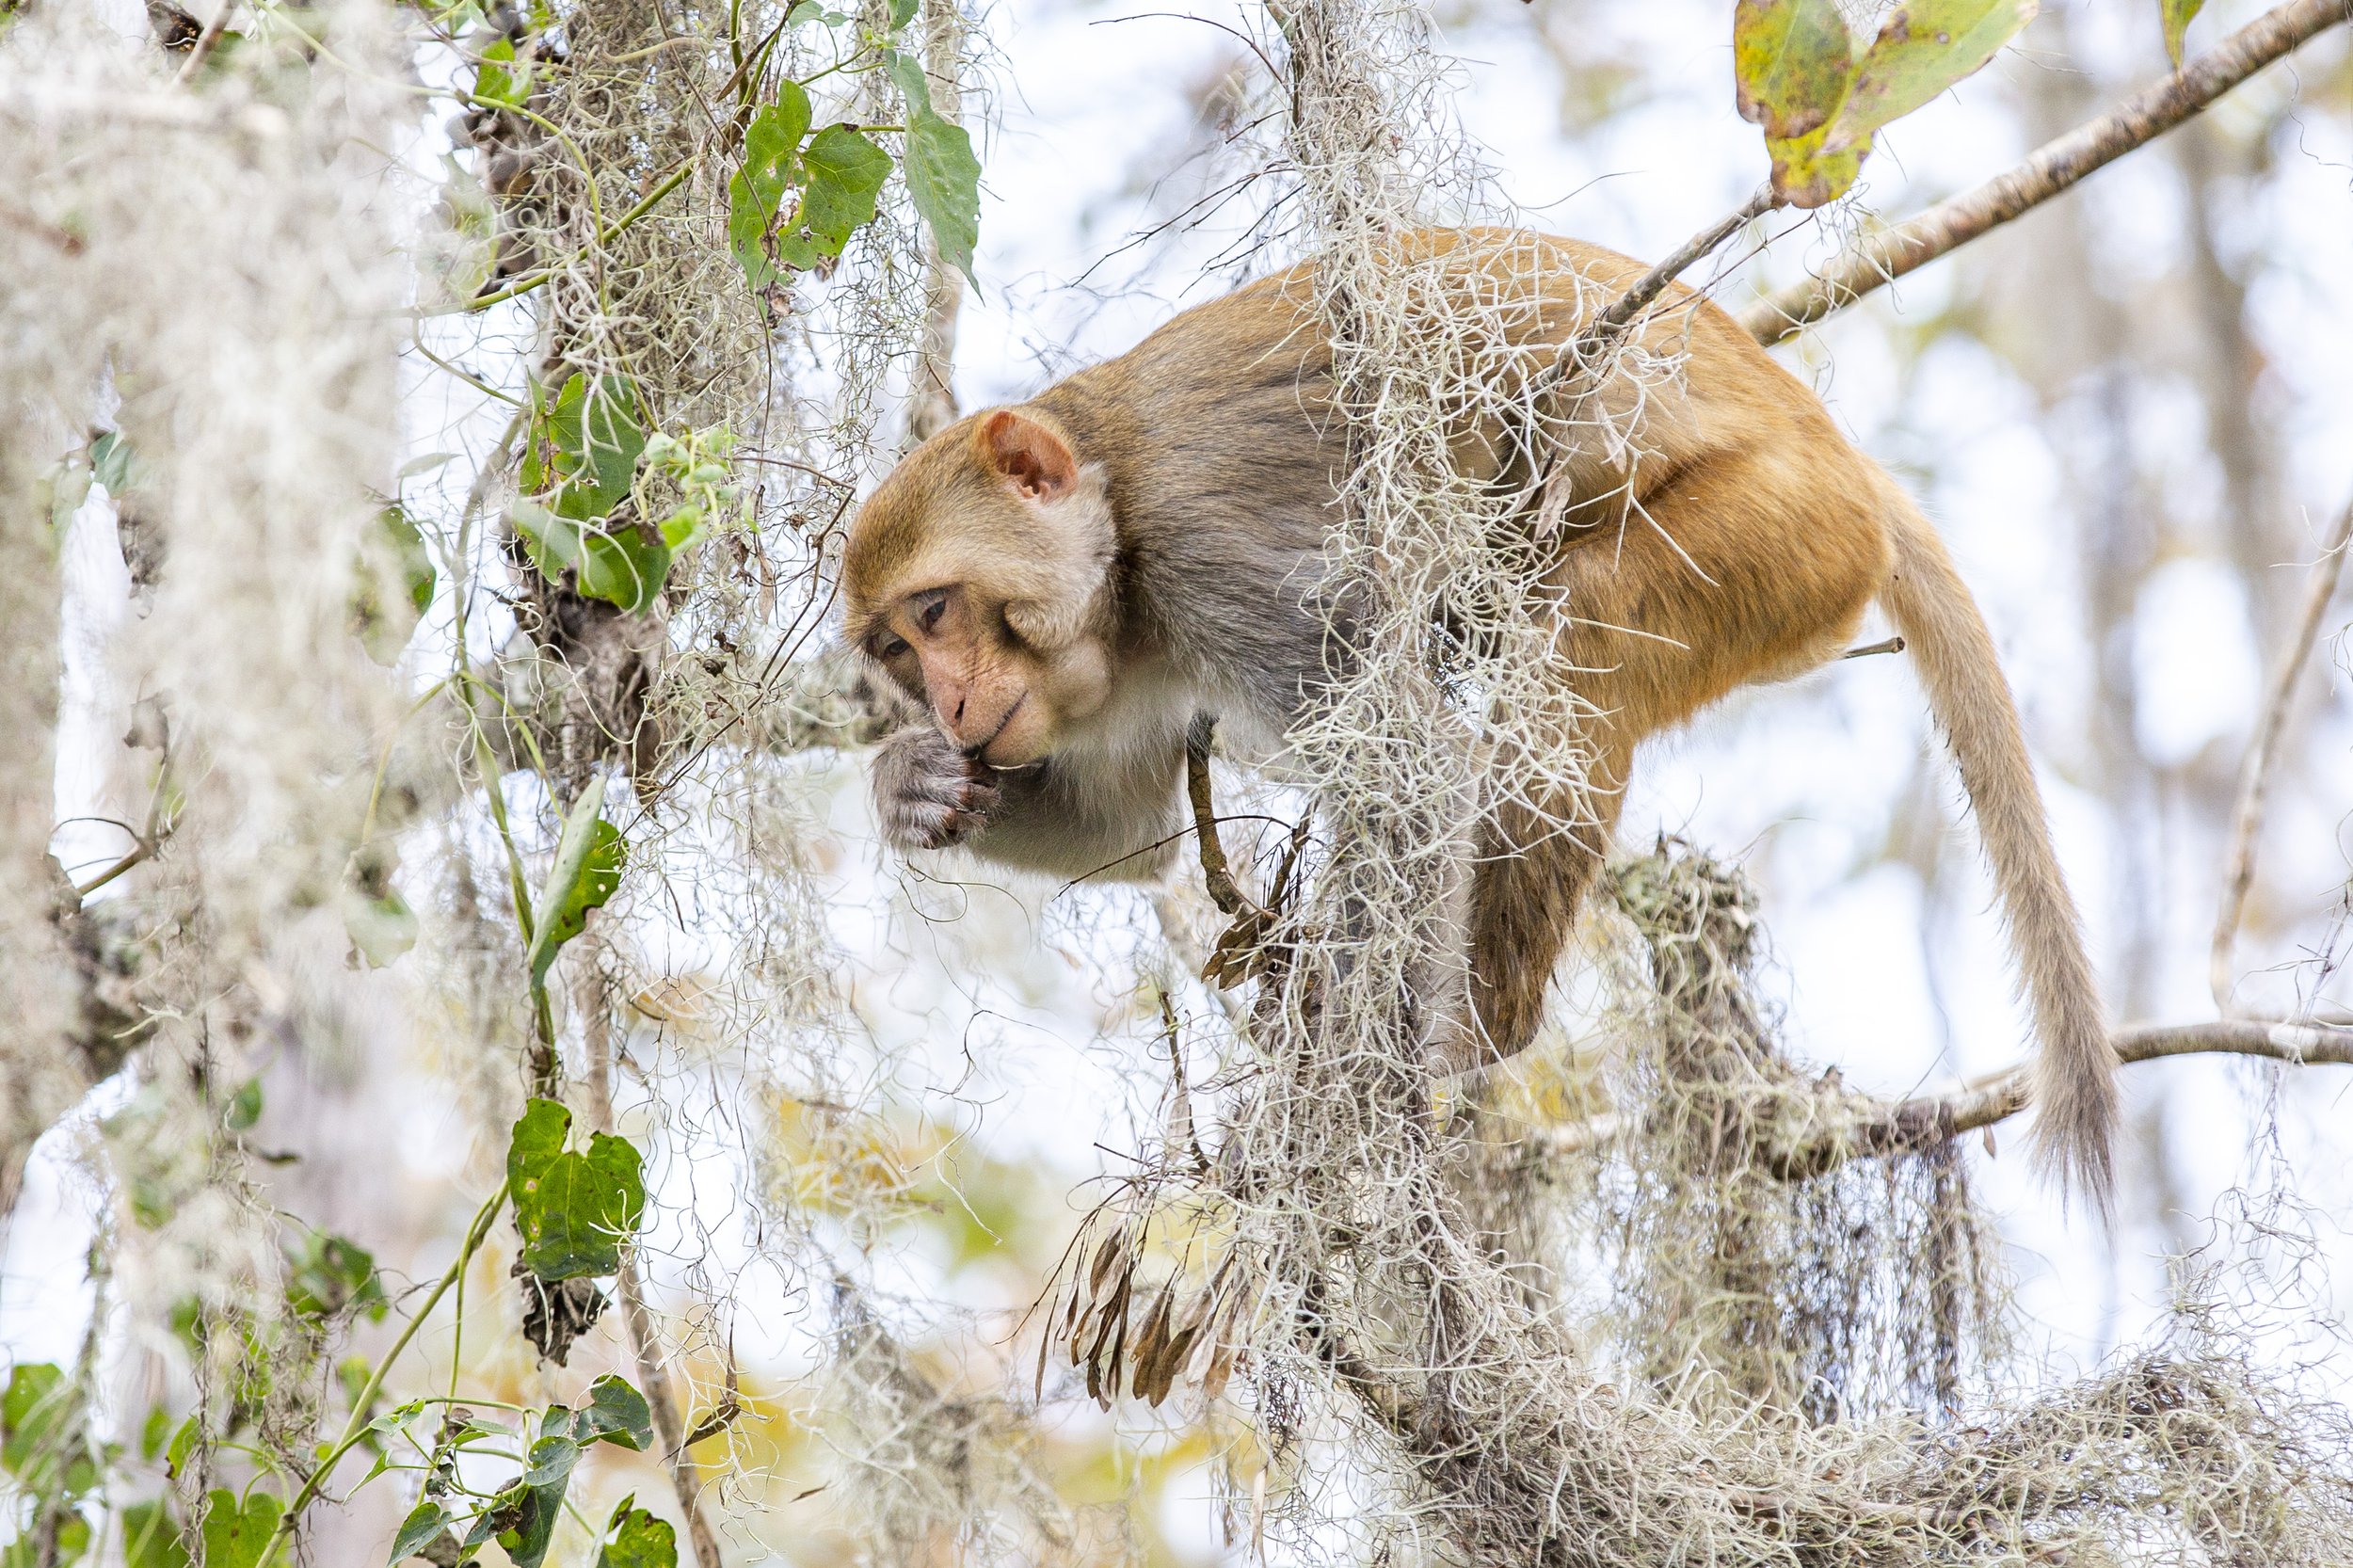  Rhesus macaque monkeys are nonnative inhabitants of the Silver Springs ecosystem. 